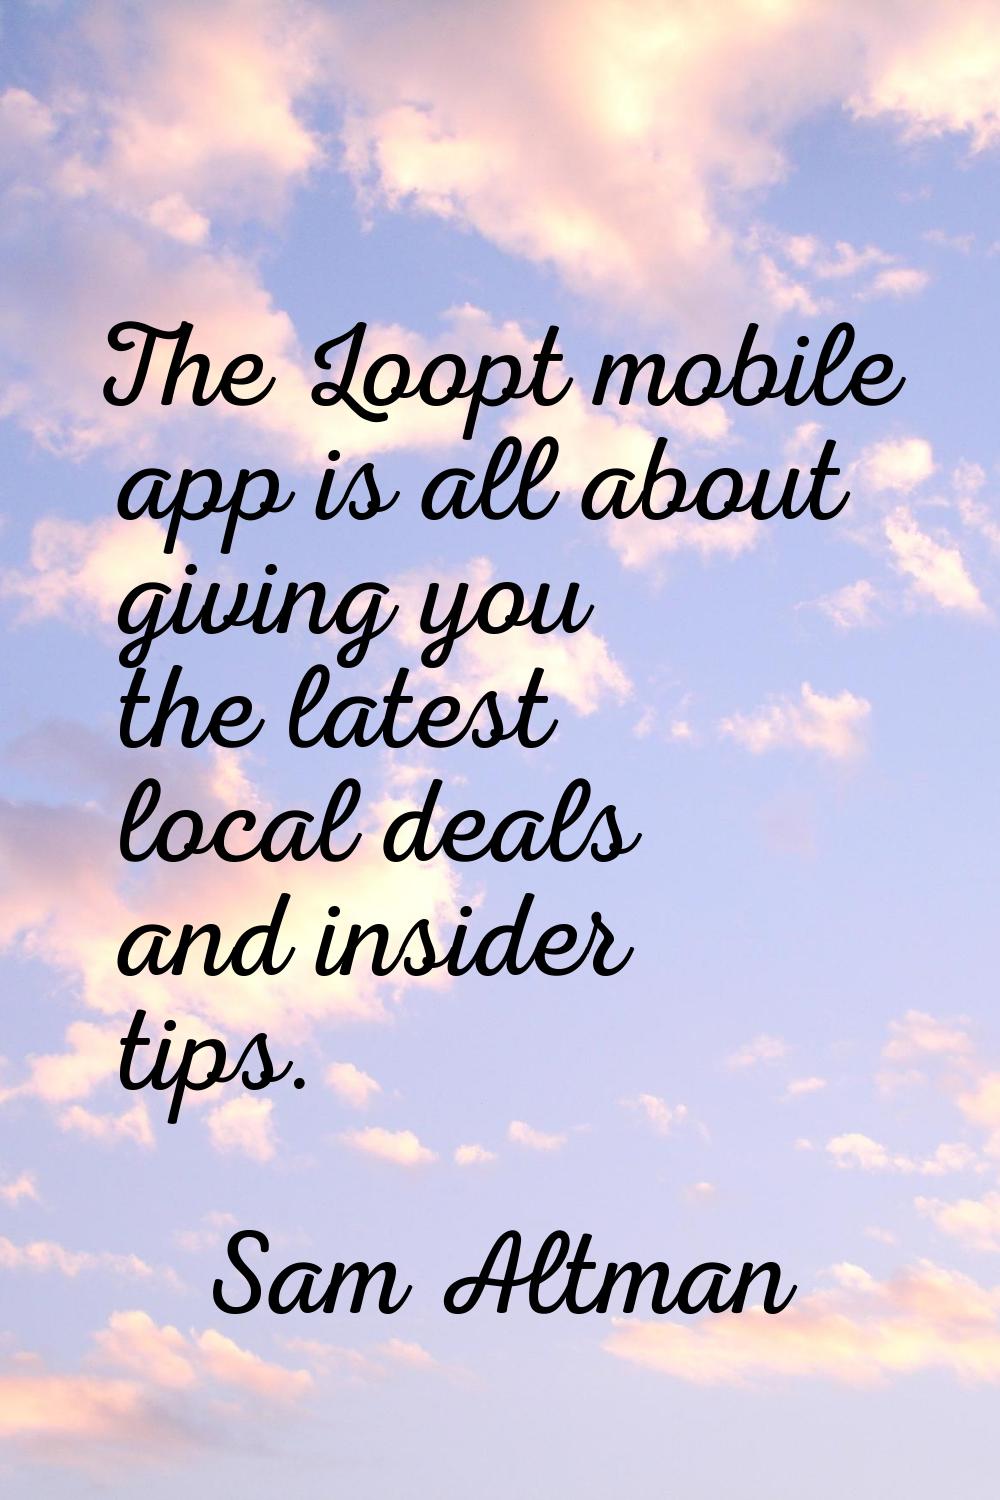 The Loopt mobile app is all about giving you the latest local deals and insider tips.